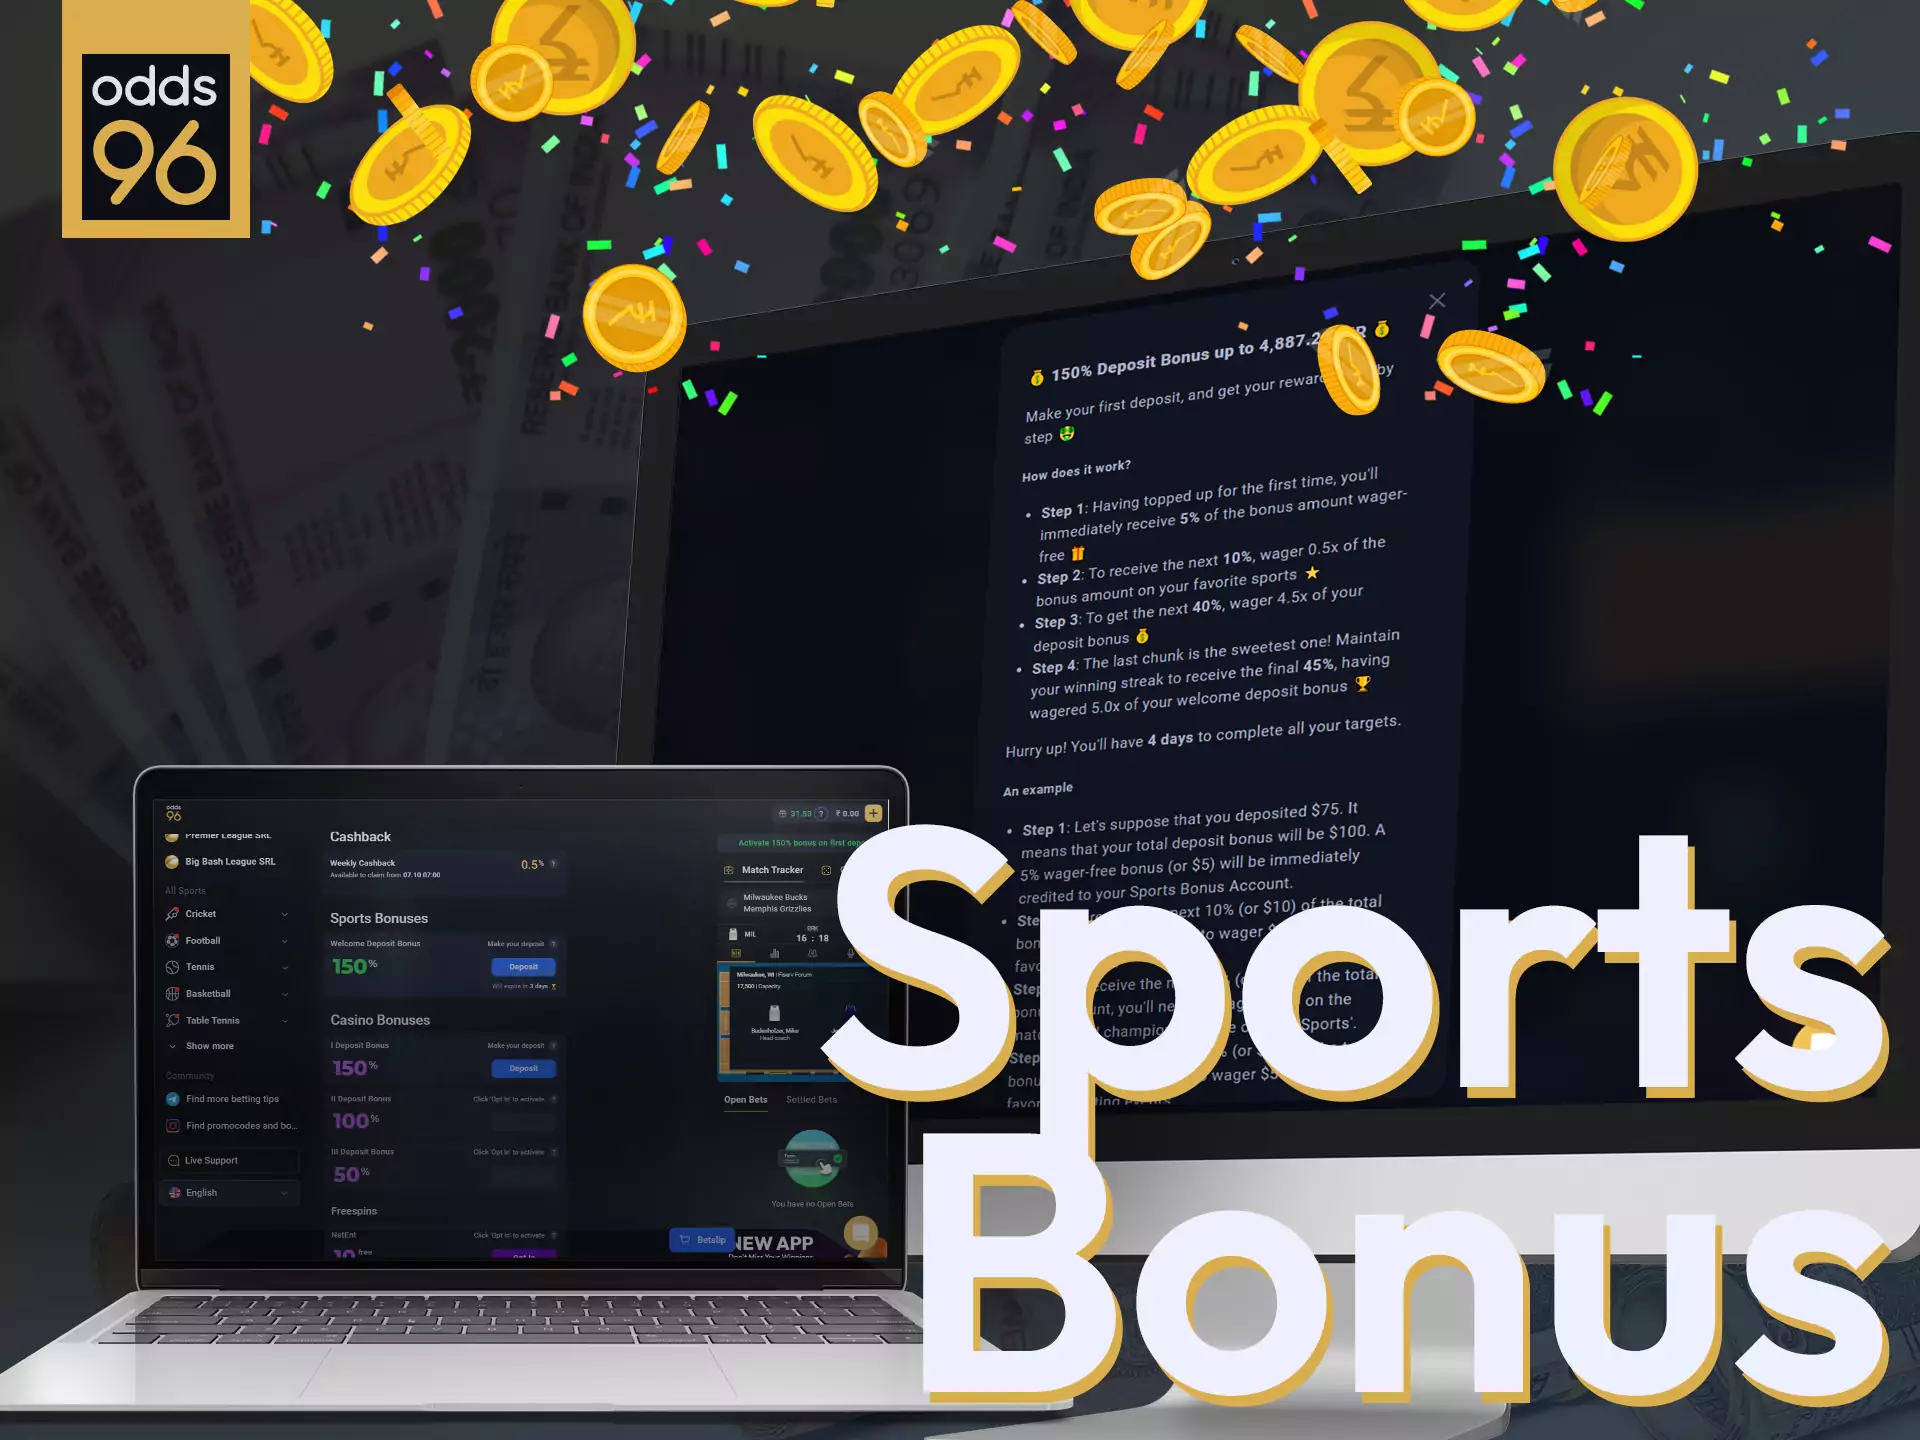 Try all the benefits of a special sports bonus from Odds96.